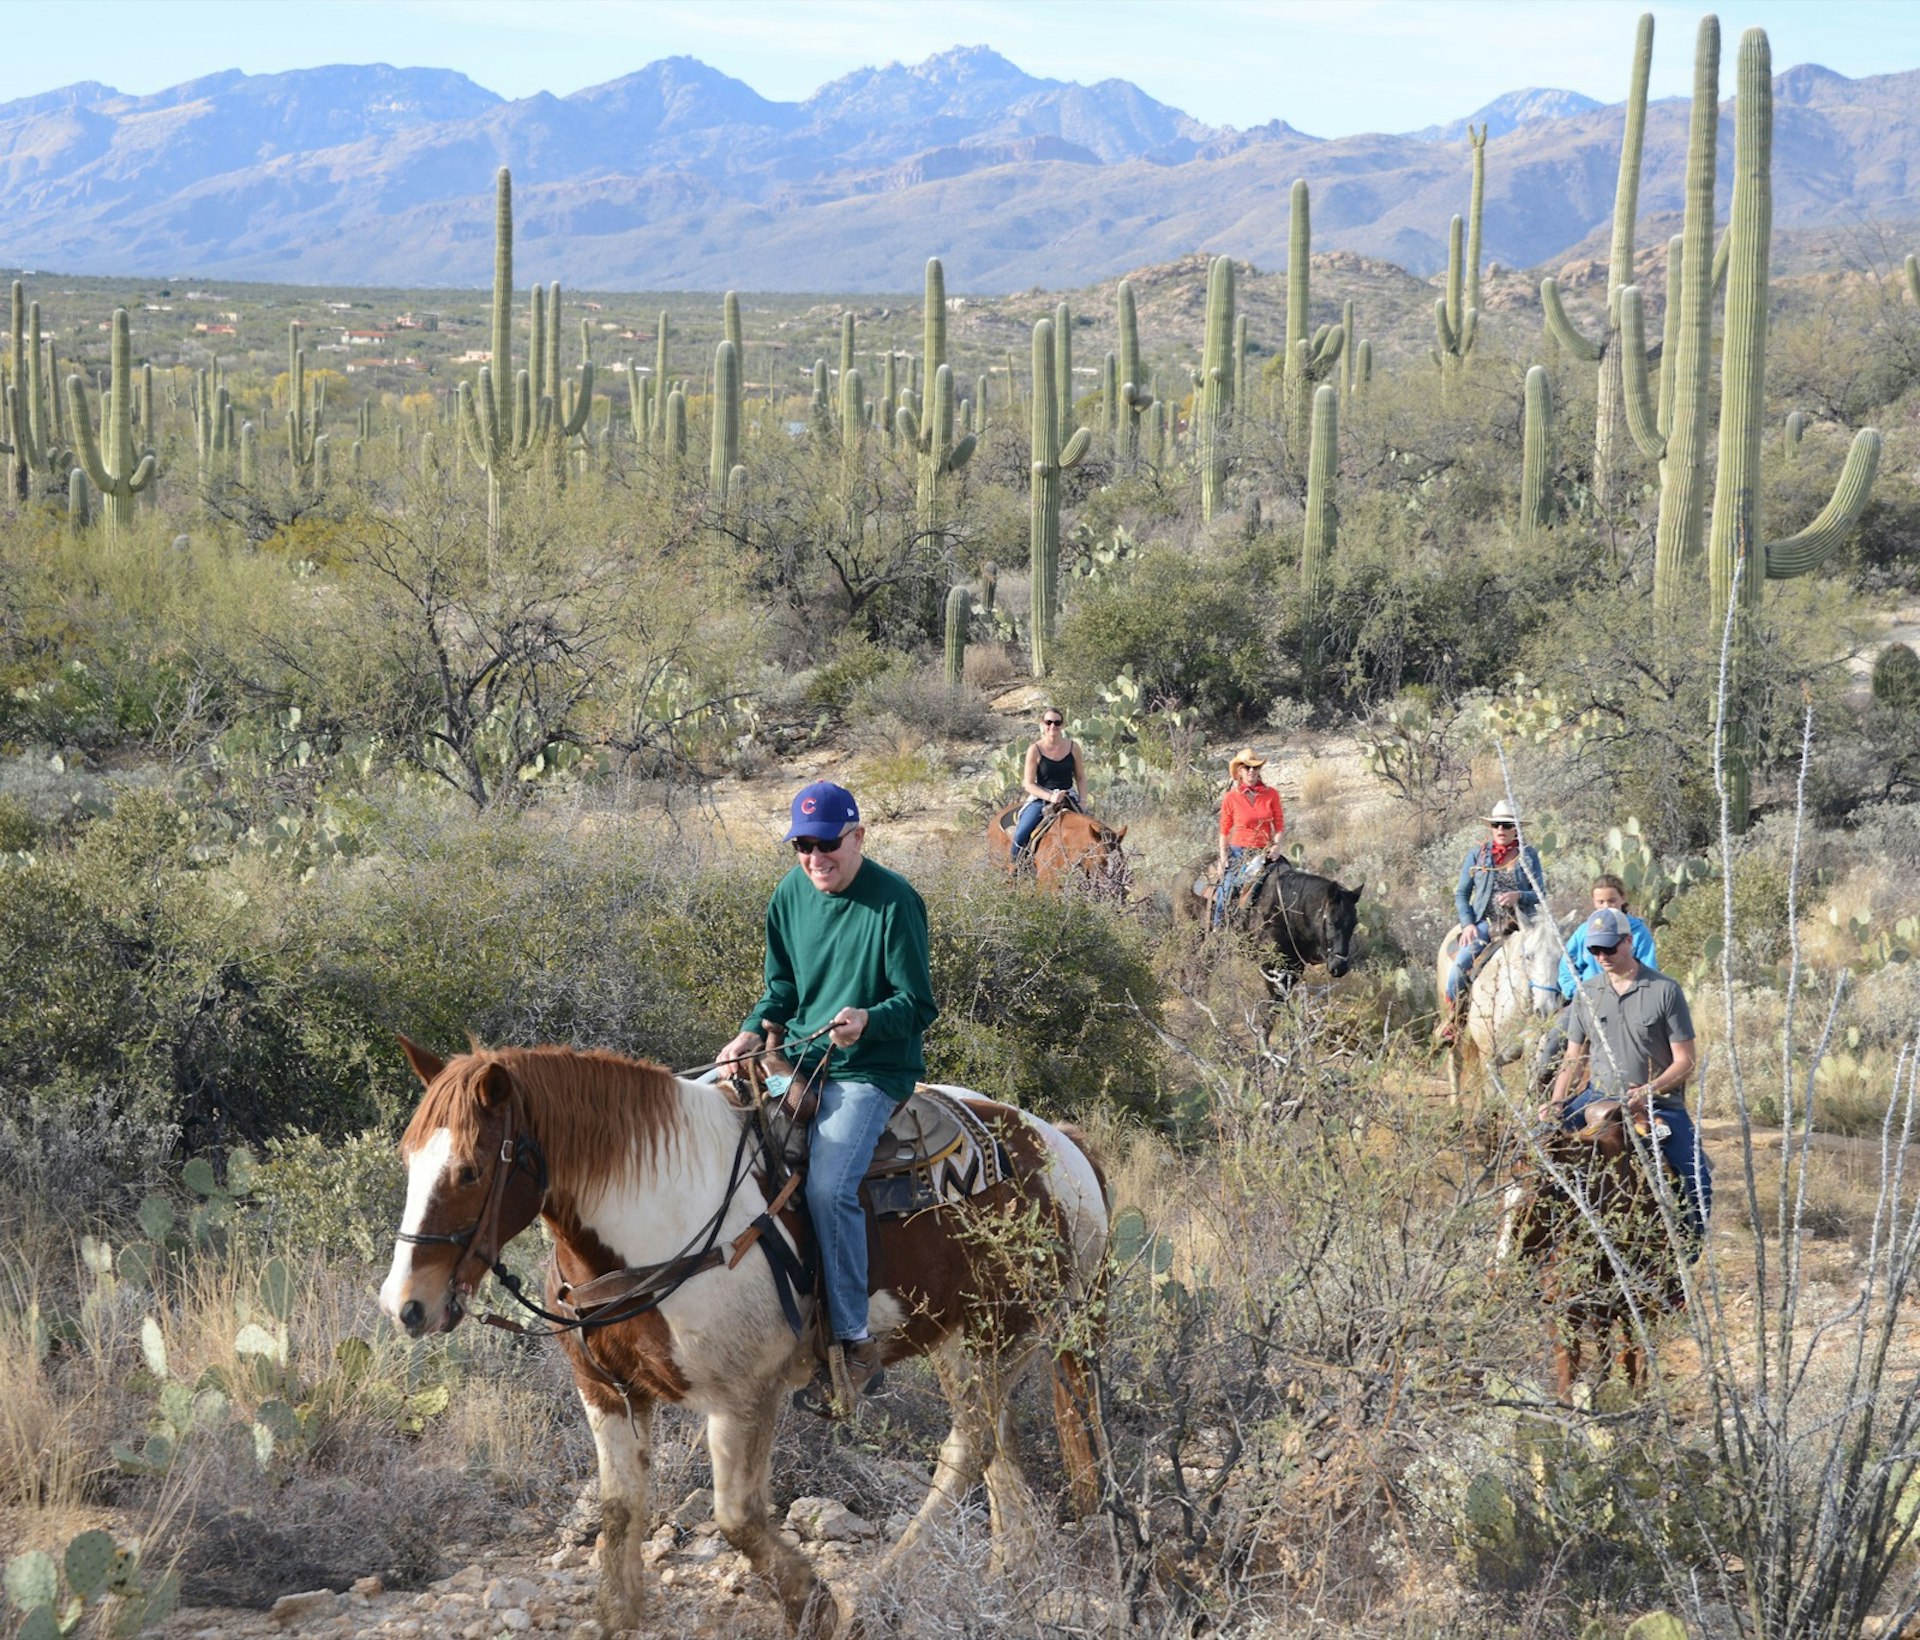 A man in a Chicago Cubs cap leads a line of dude ranch visitors on horses through scrubland and cactuses